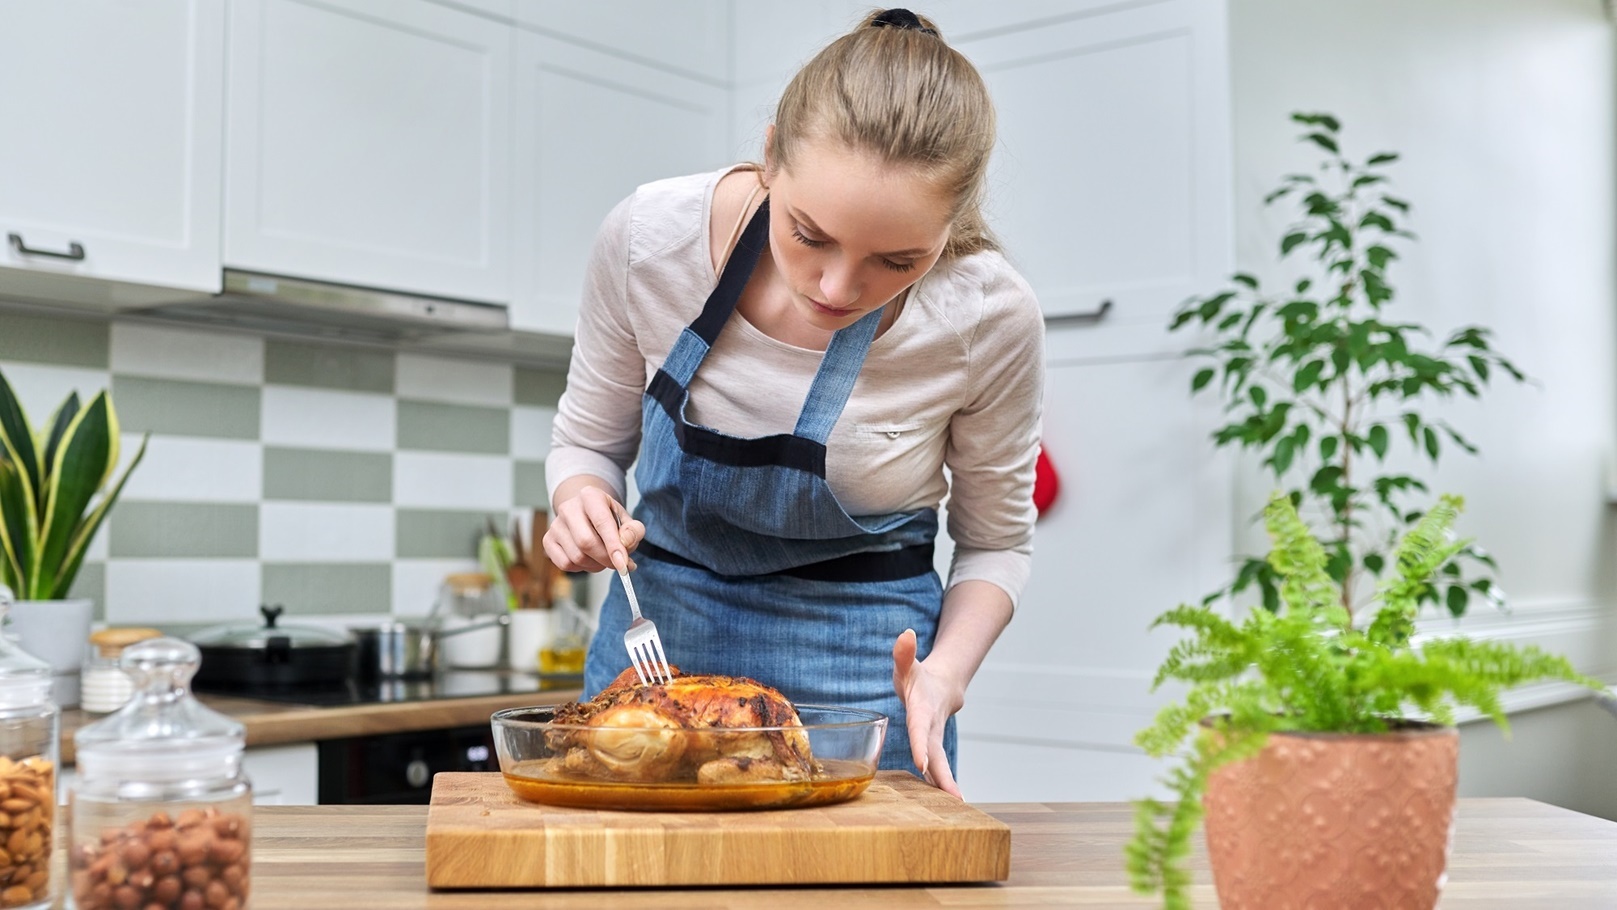 woman-cooking-baked-chicken-at-home-in-the-kitchen-2022-01-27-16-35-54-utc (1)